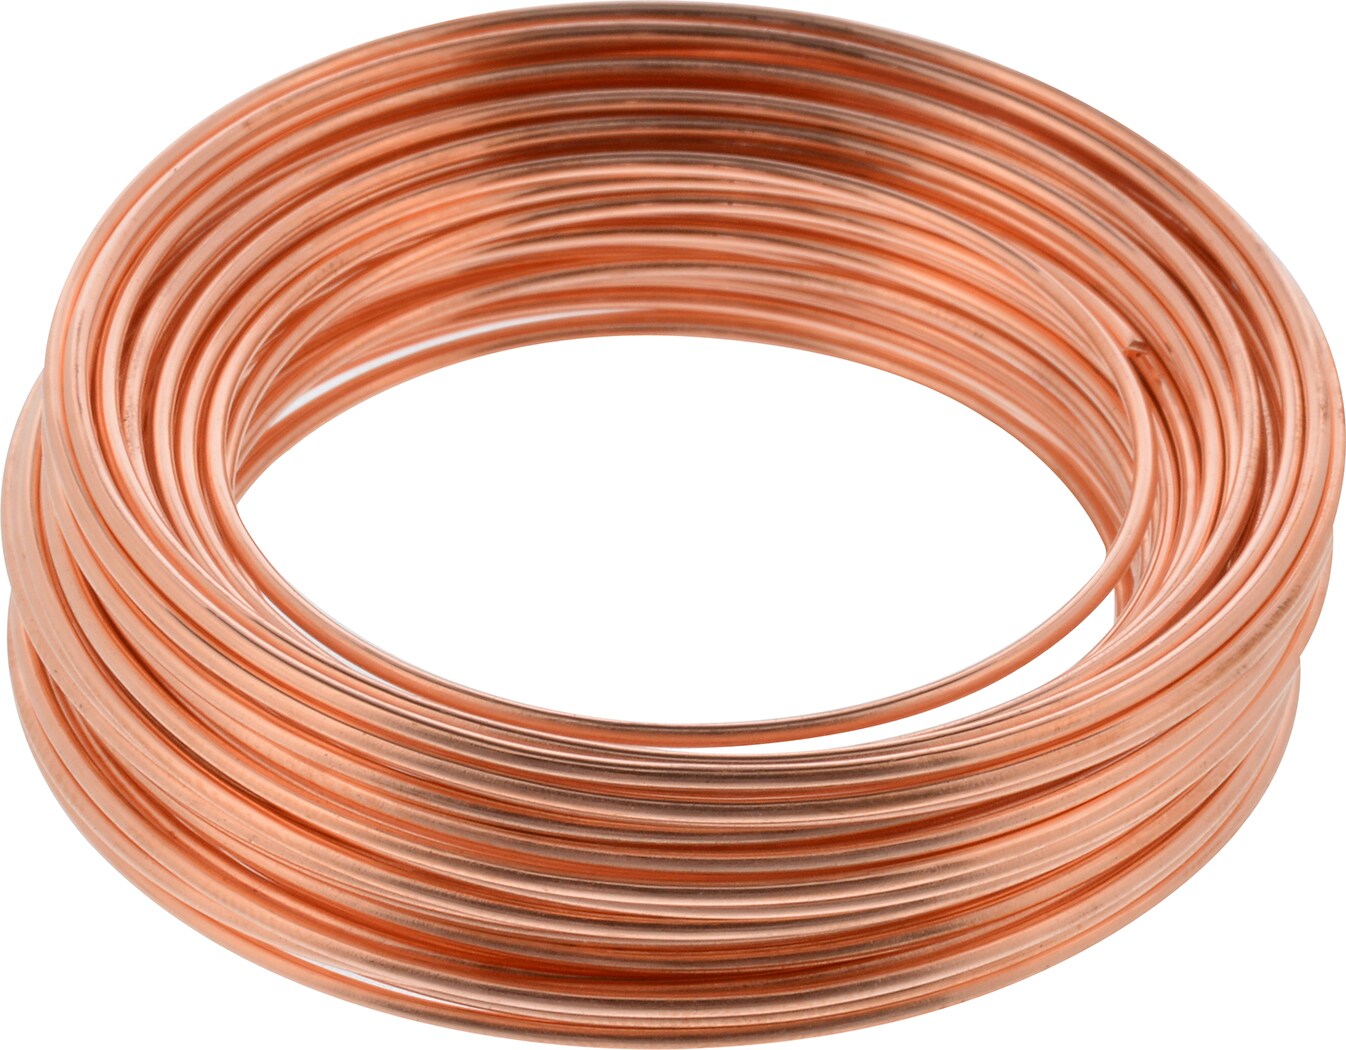 Annealed 8 AWG Bare Solid Copper Round Wire 25 Ft Coil 